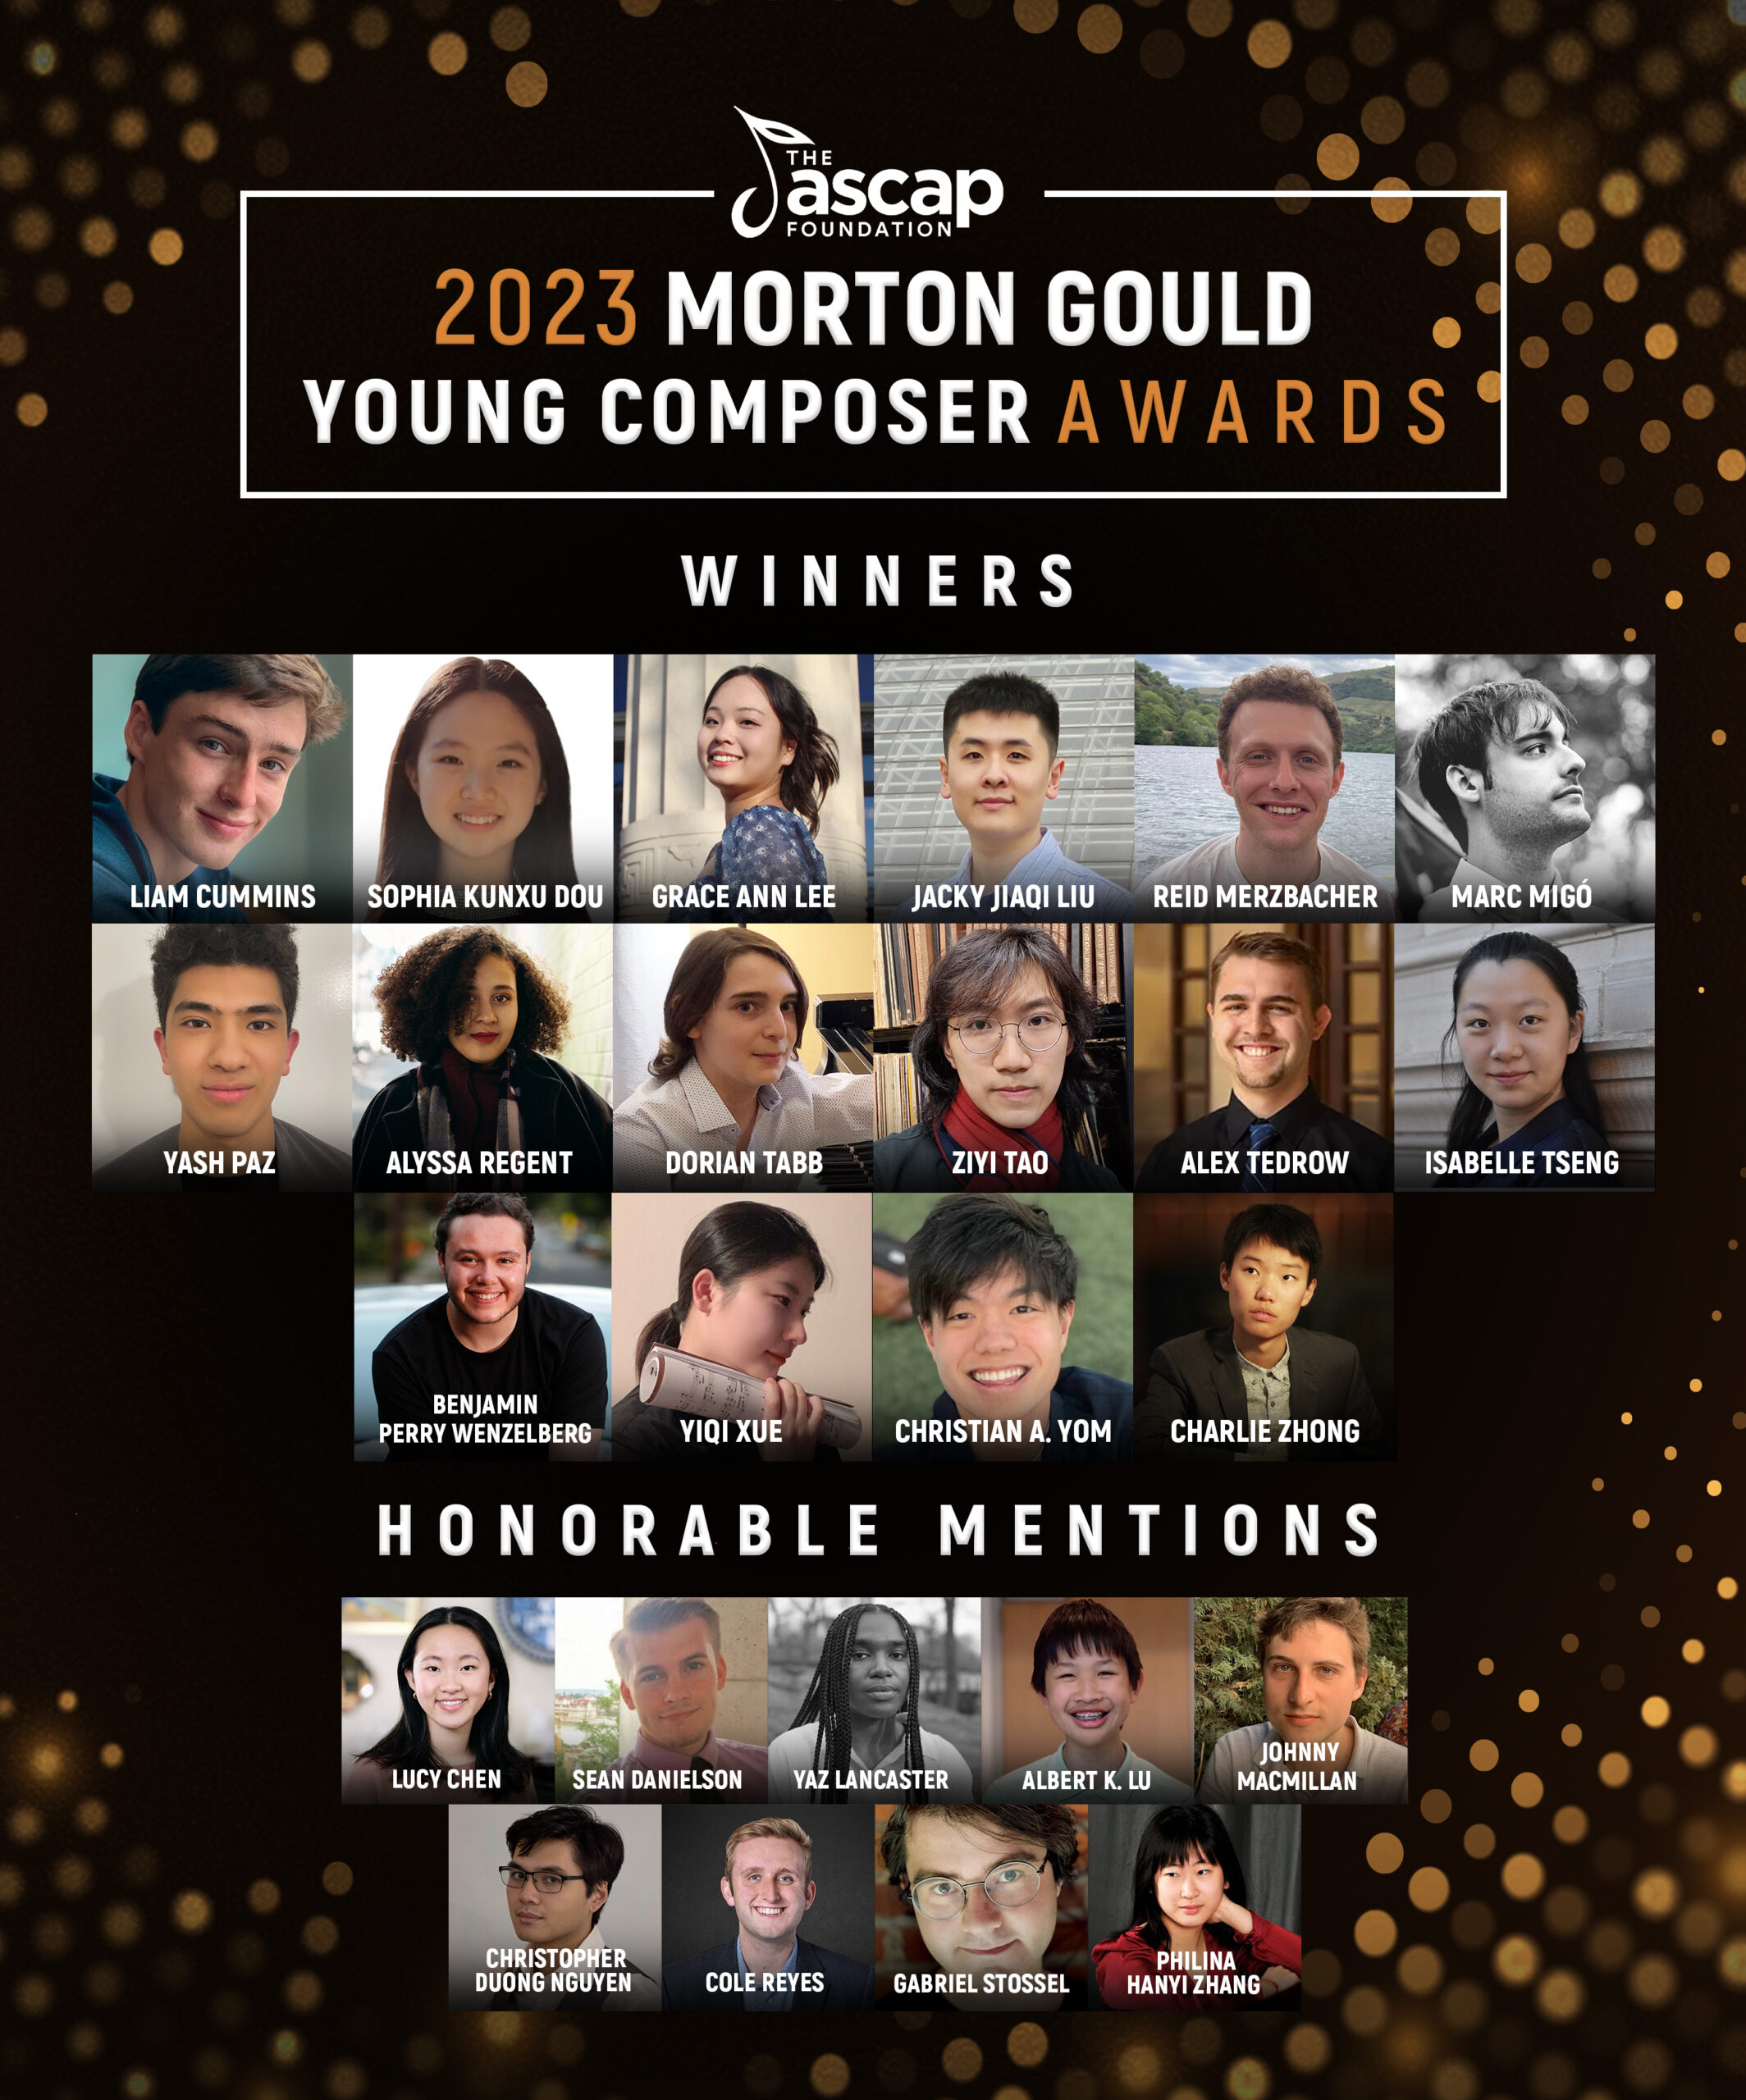 Photos of each of the 2023 ASCAP Foundation Morton Gould Award Winners and honorable mentions.